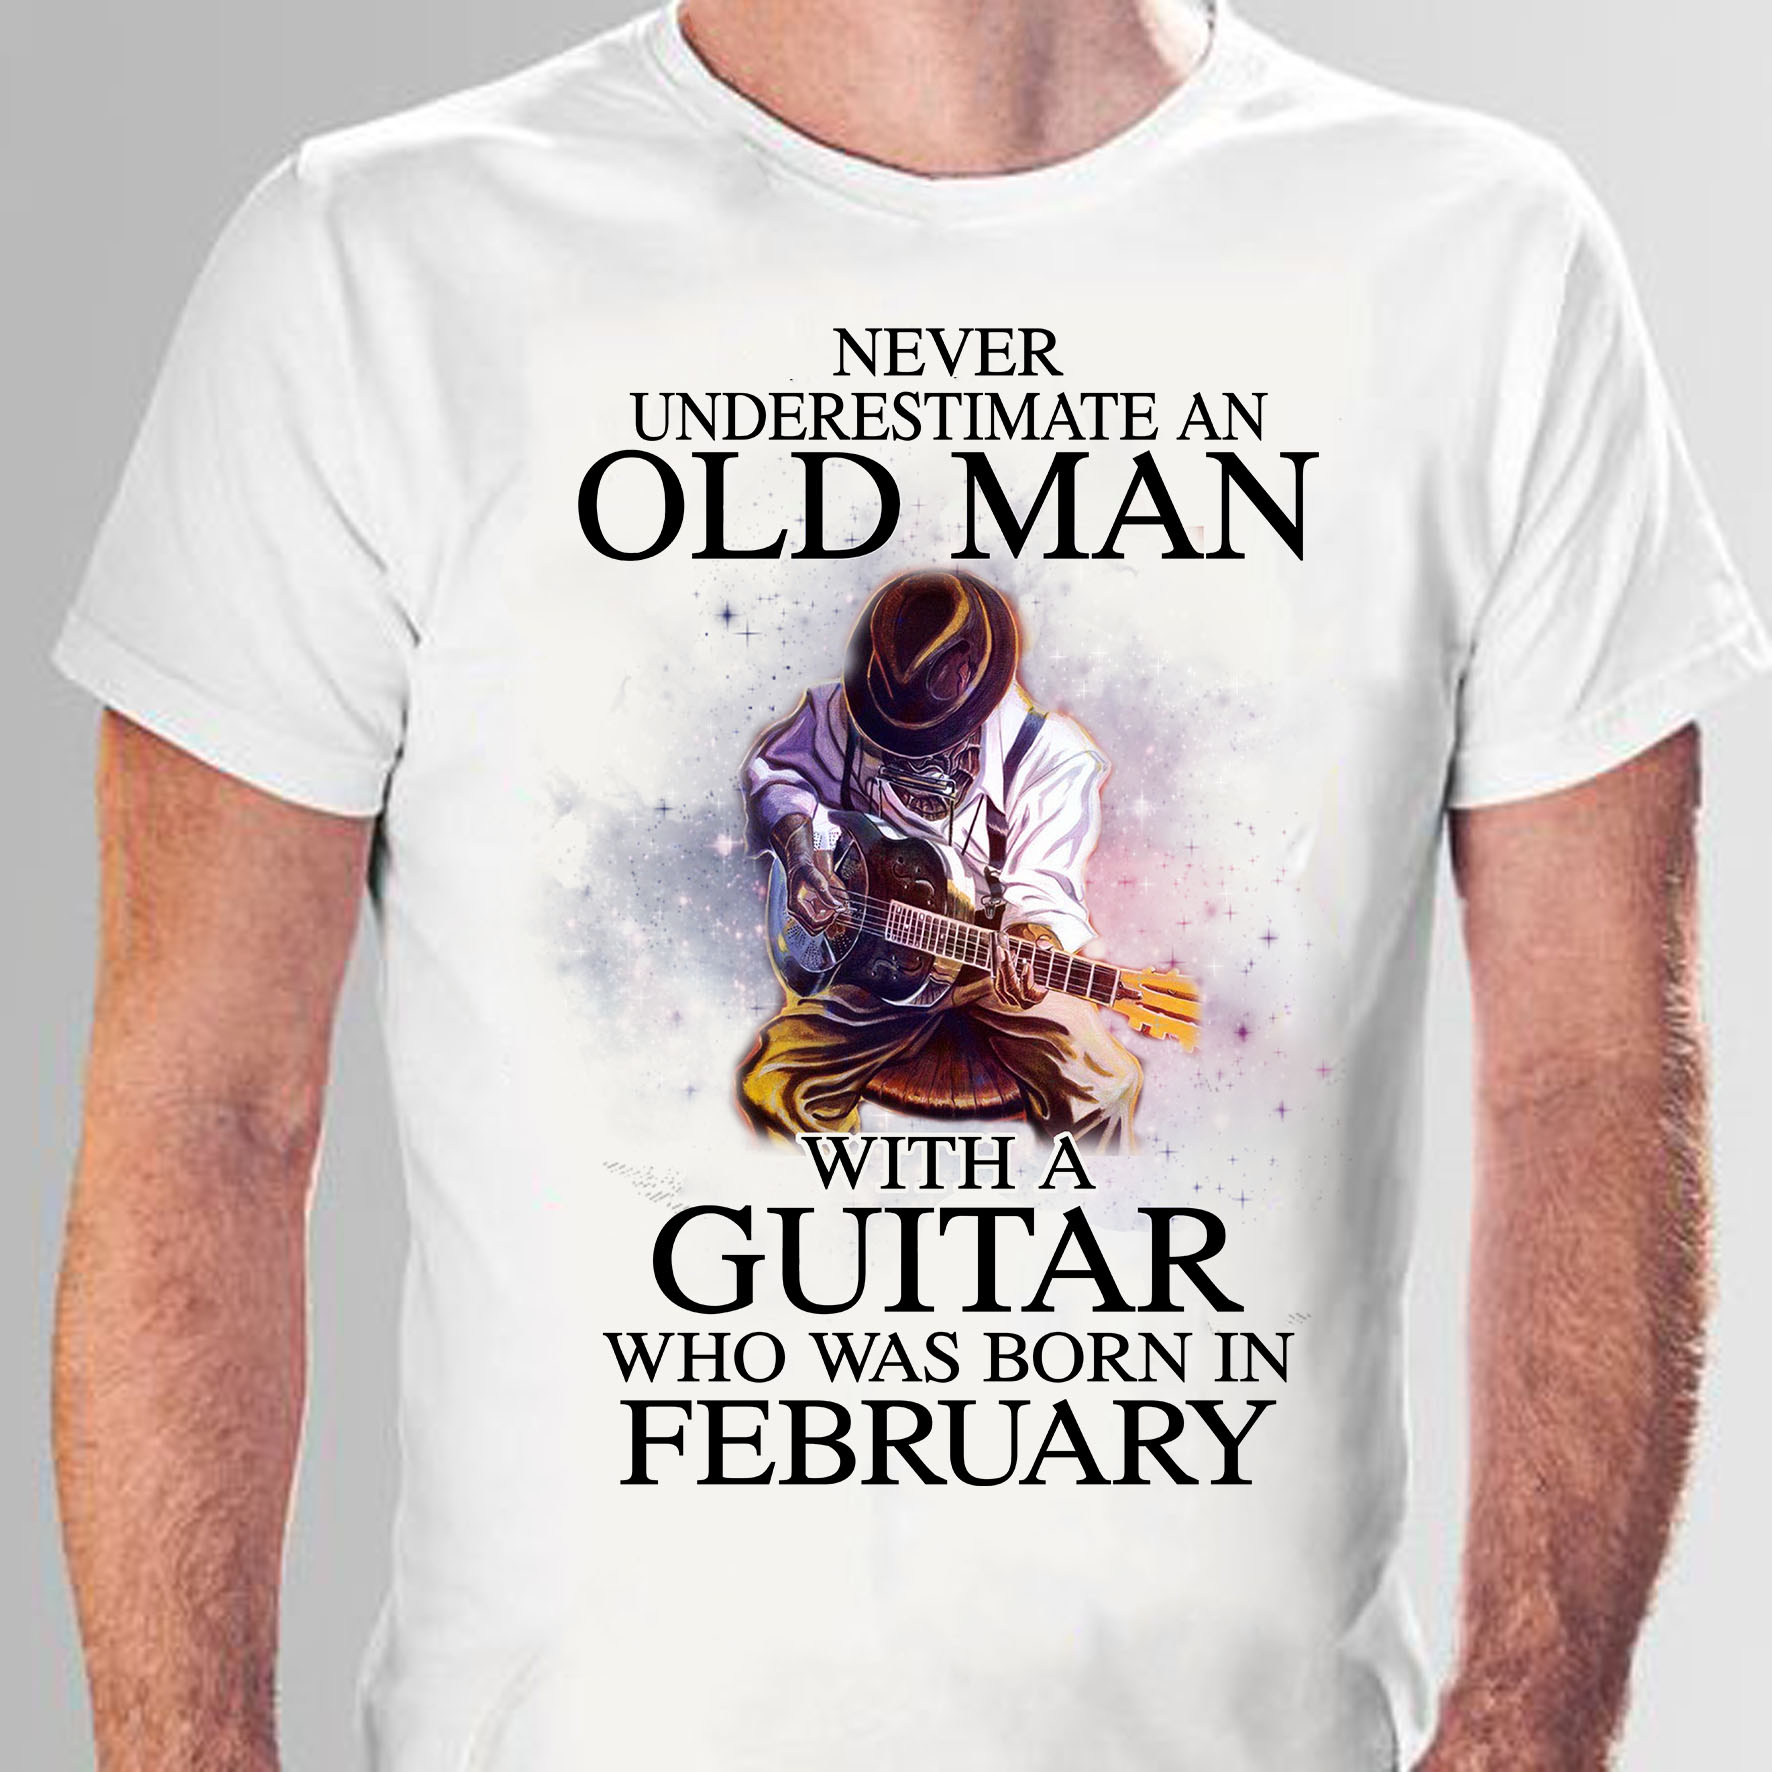 Never underestimate an old man with a guitar who was born in February - Guitarist